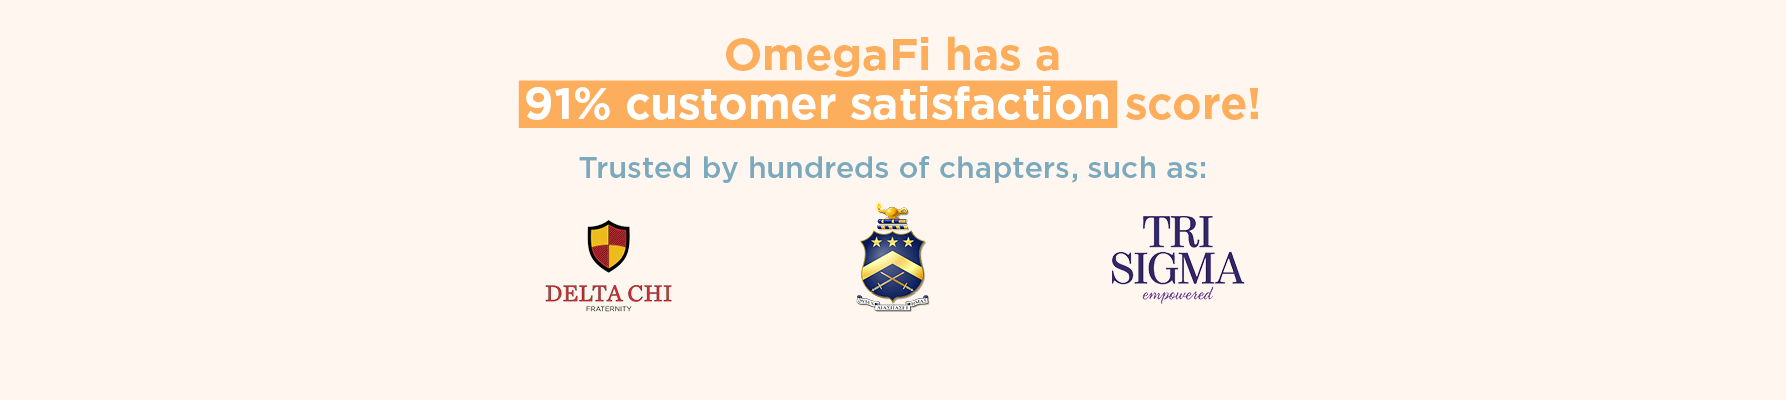 OmegaFi has a 9/10 customer satisfaction score and is trusted by many chapters.